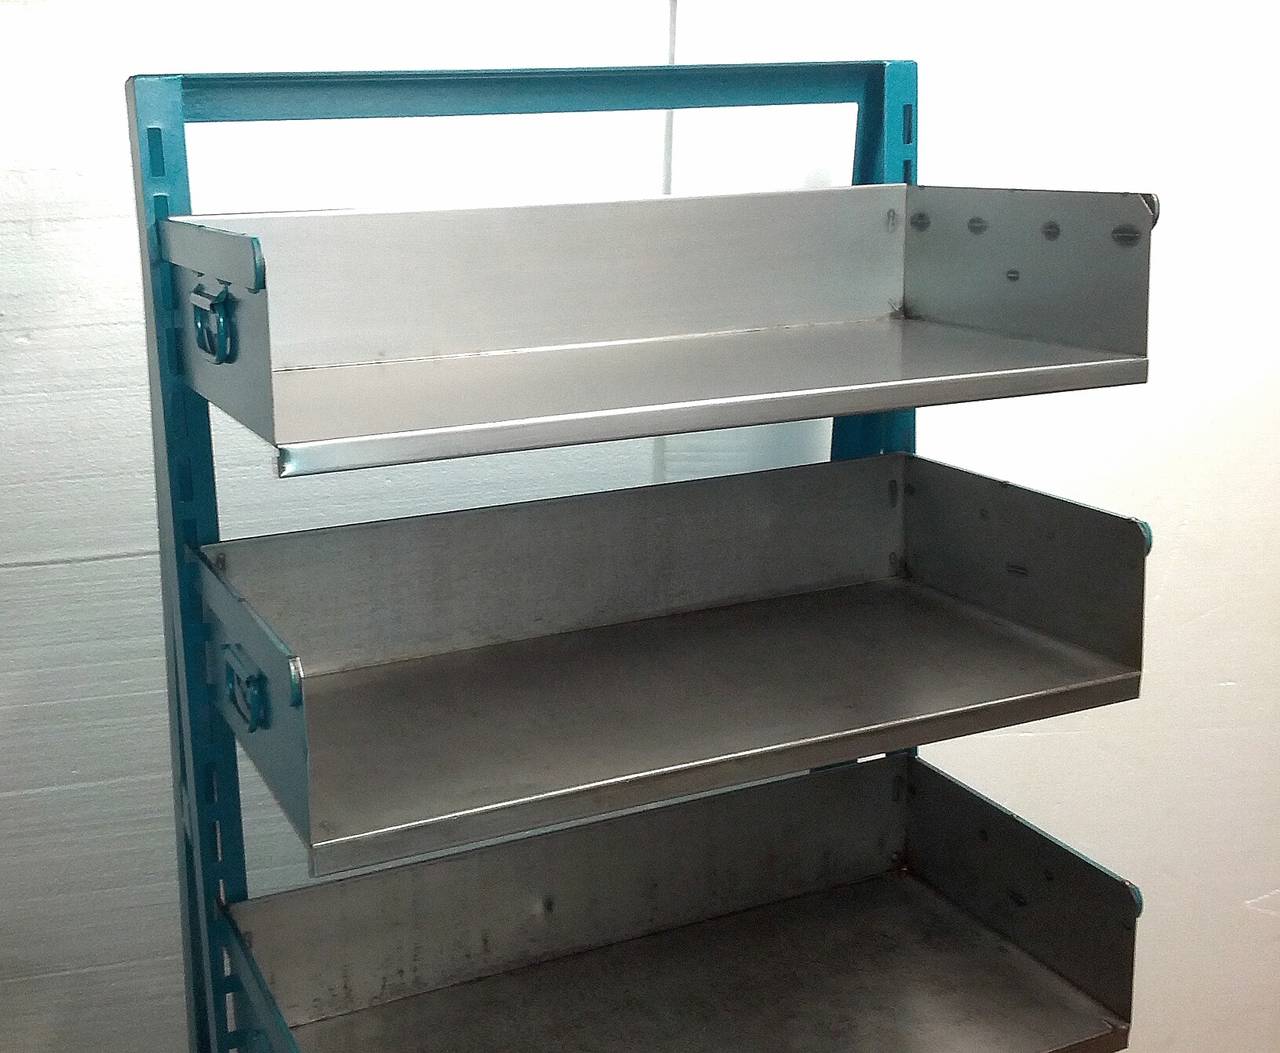 Straight from the factory floor- cleaned, sealed and room ready - this early A-frame shelving unit adds style and storage to any room. Can also be used as a bookcase. Easily adjustable bin shelves with handles. Casters allow it to move about easily.